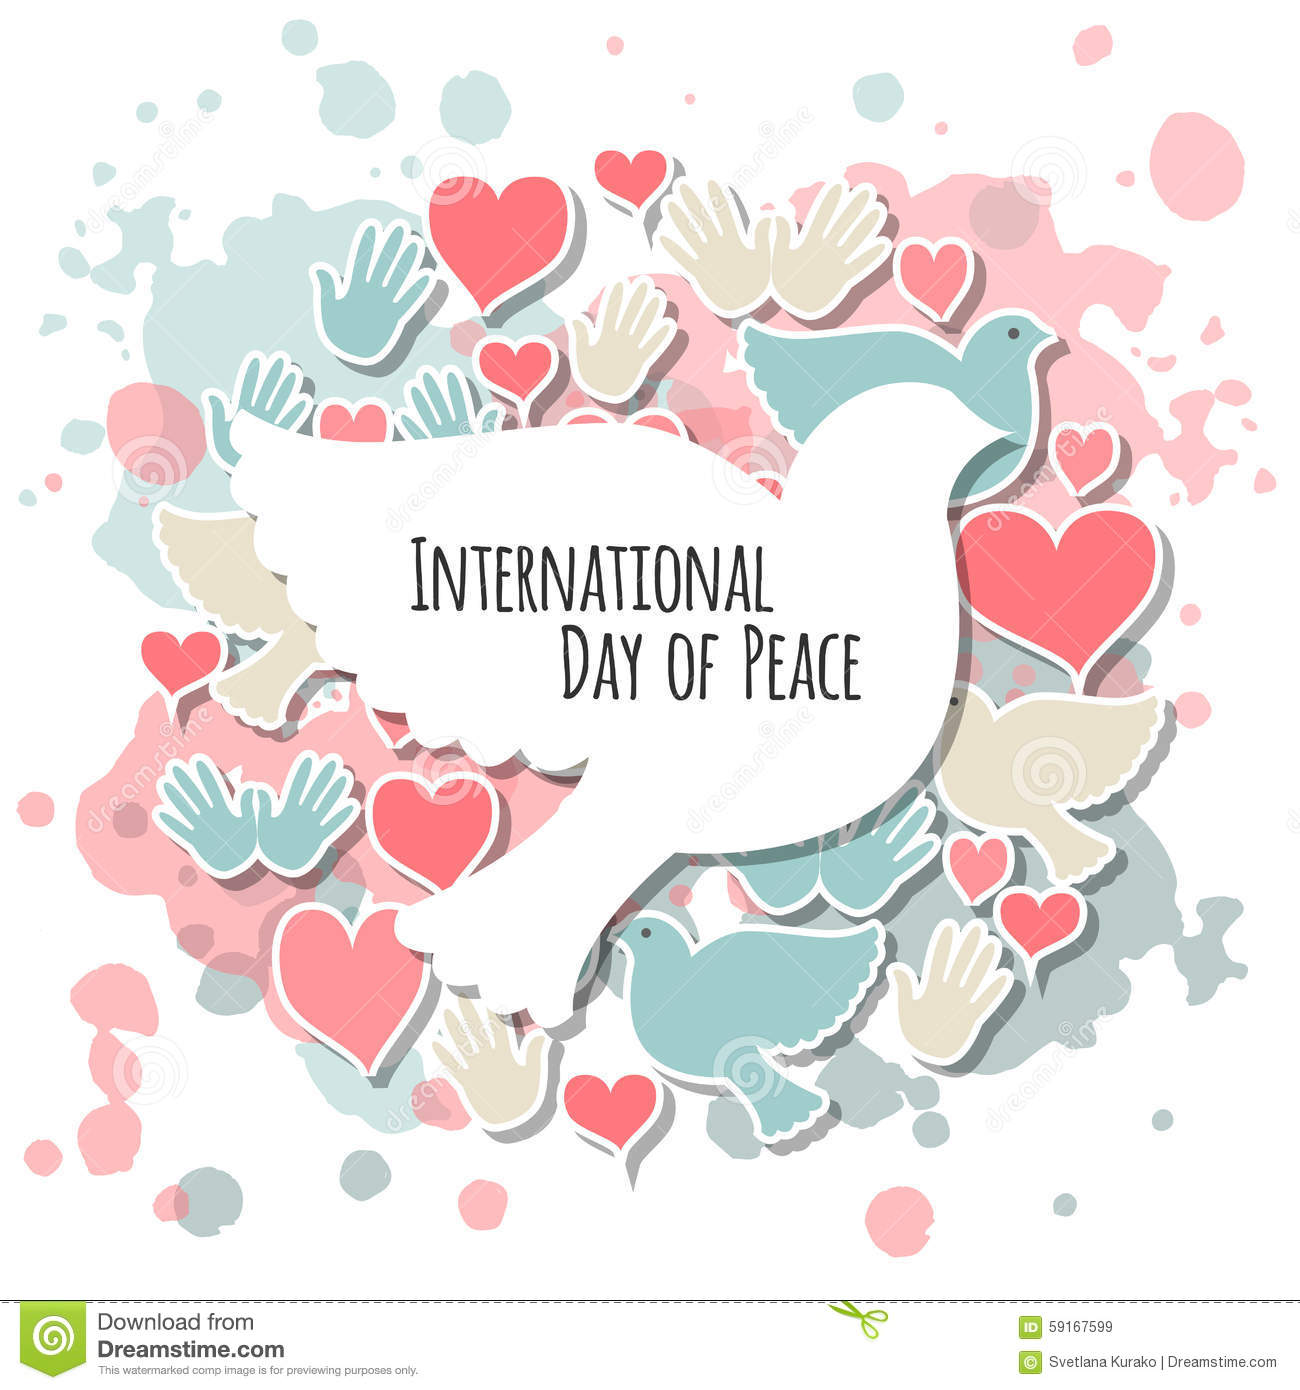 International Day Of Peace Doves And Hearts Greeting Card